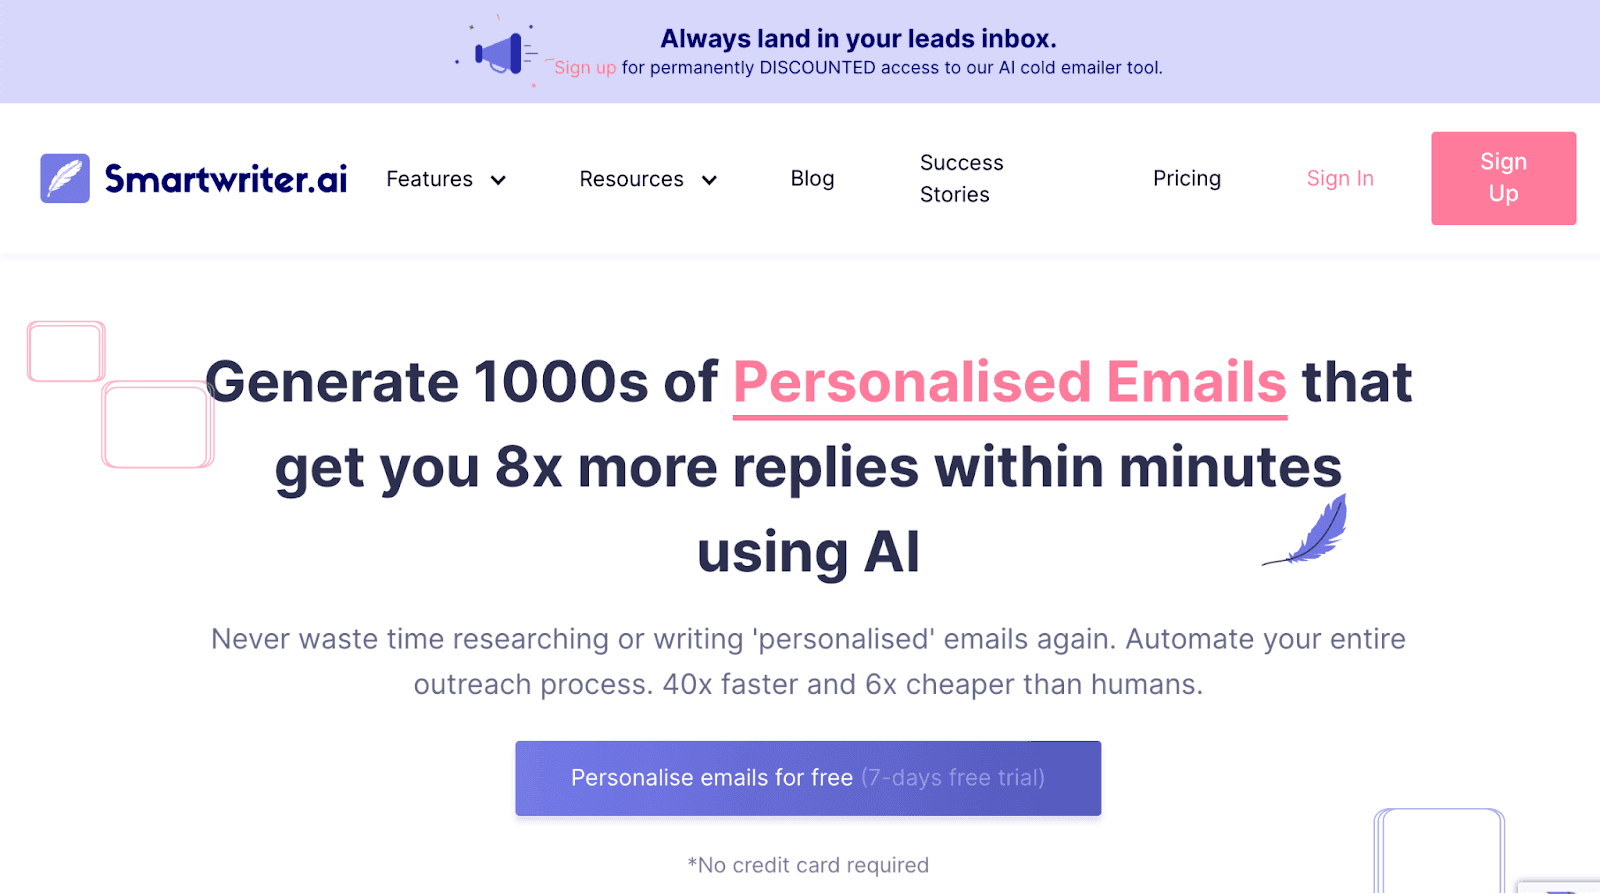 Smartwriter webpage - Generate thousands of personalized emails that get you 8x more replies within minutes using AI